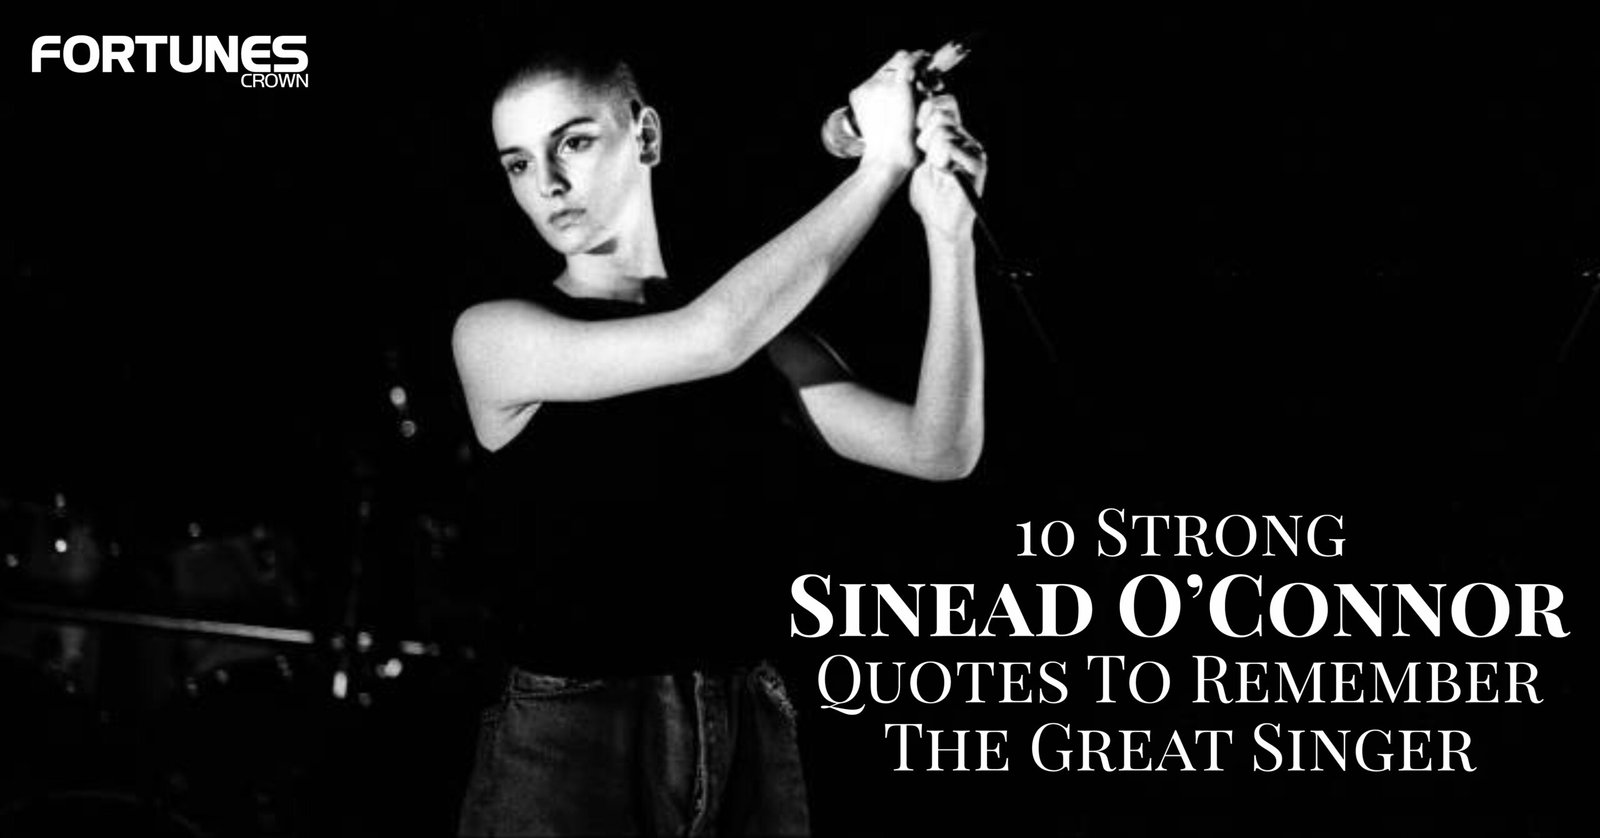 10 Strong Sinead O’Connor Quotes To Remember The Great Singer